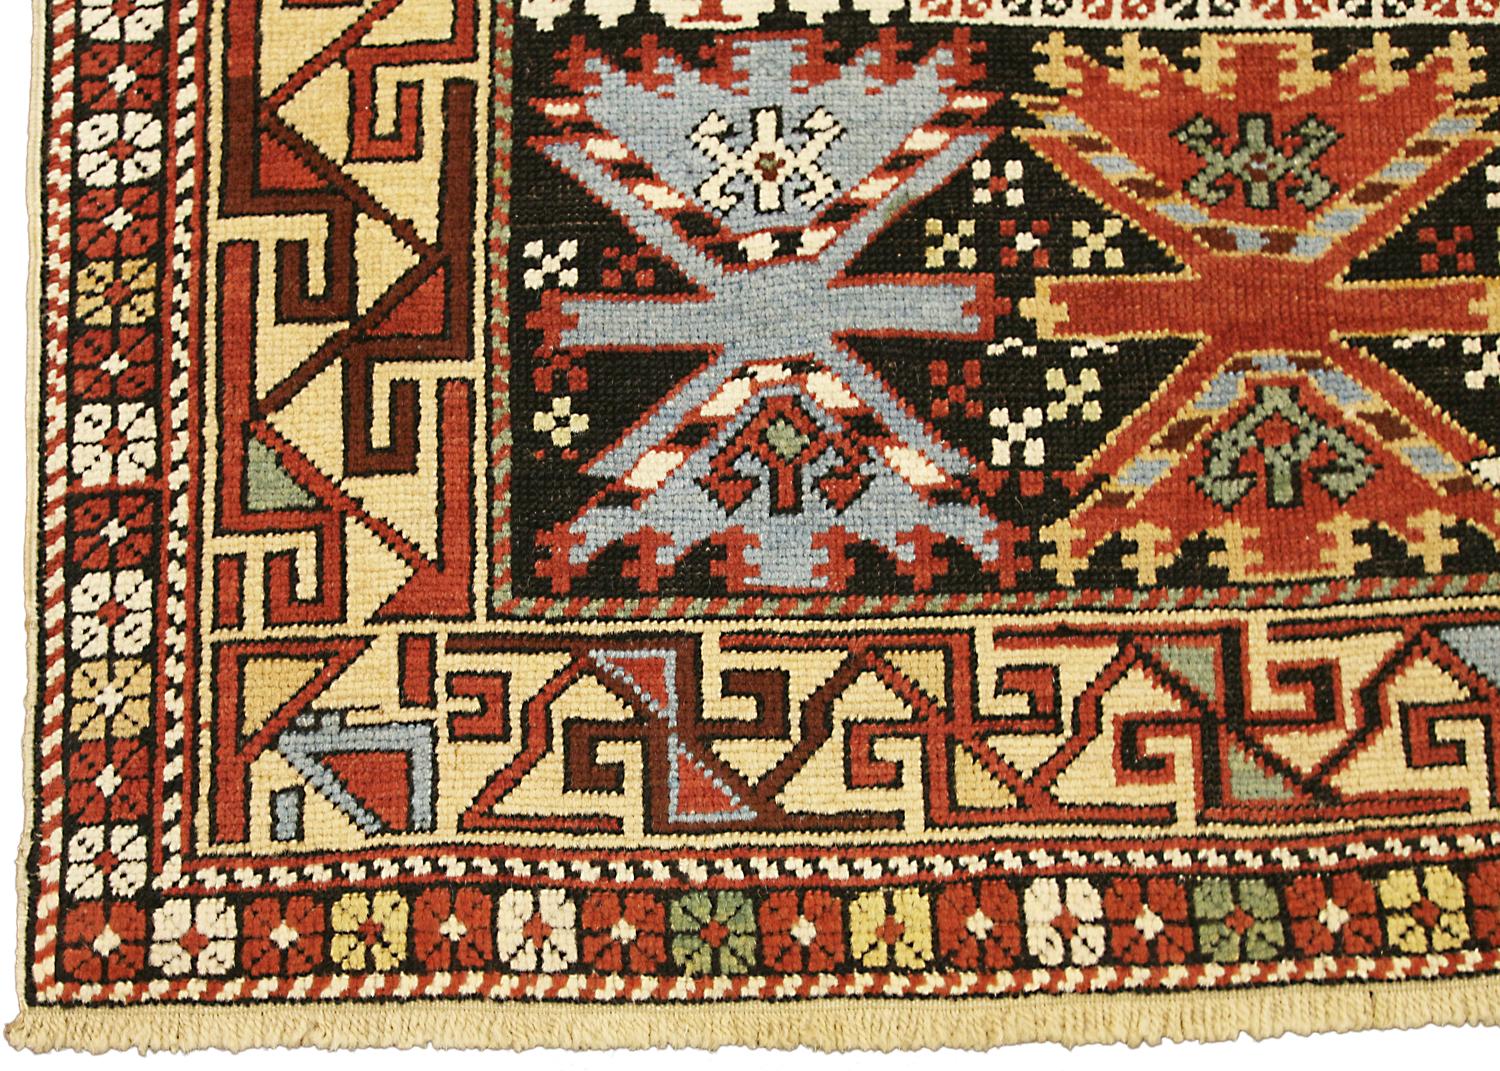 This is an antique Shirvan rug from the southern part of the Caucasus mountains and it was woven during the end of the 19th century. The field of this rug is decorated with repeating hooked medallions and its yellow and black borders create color